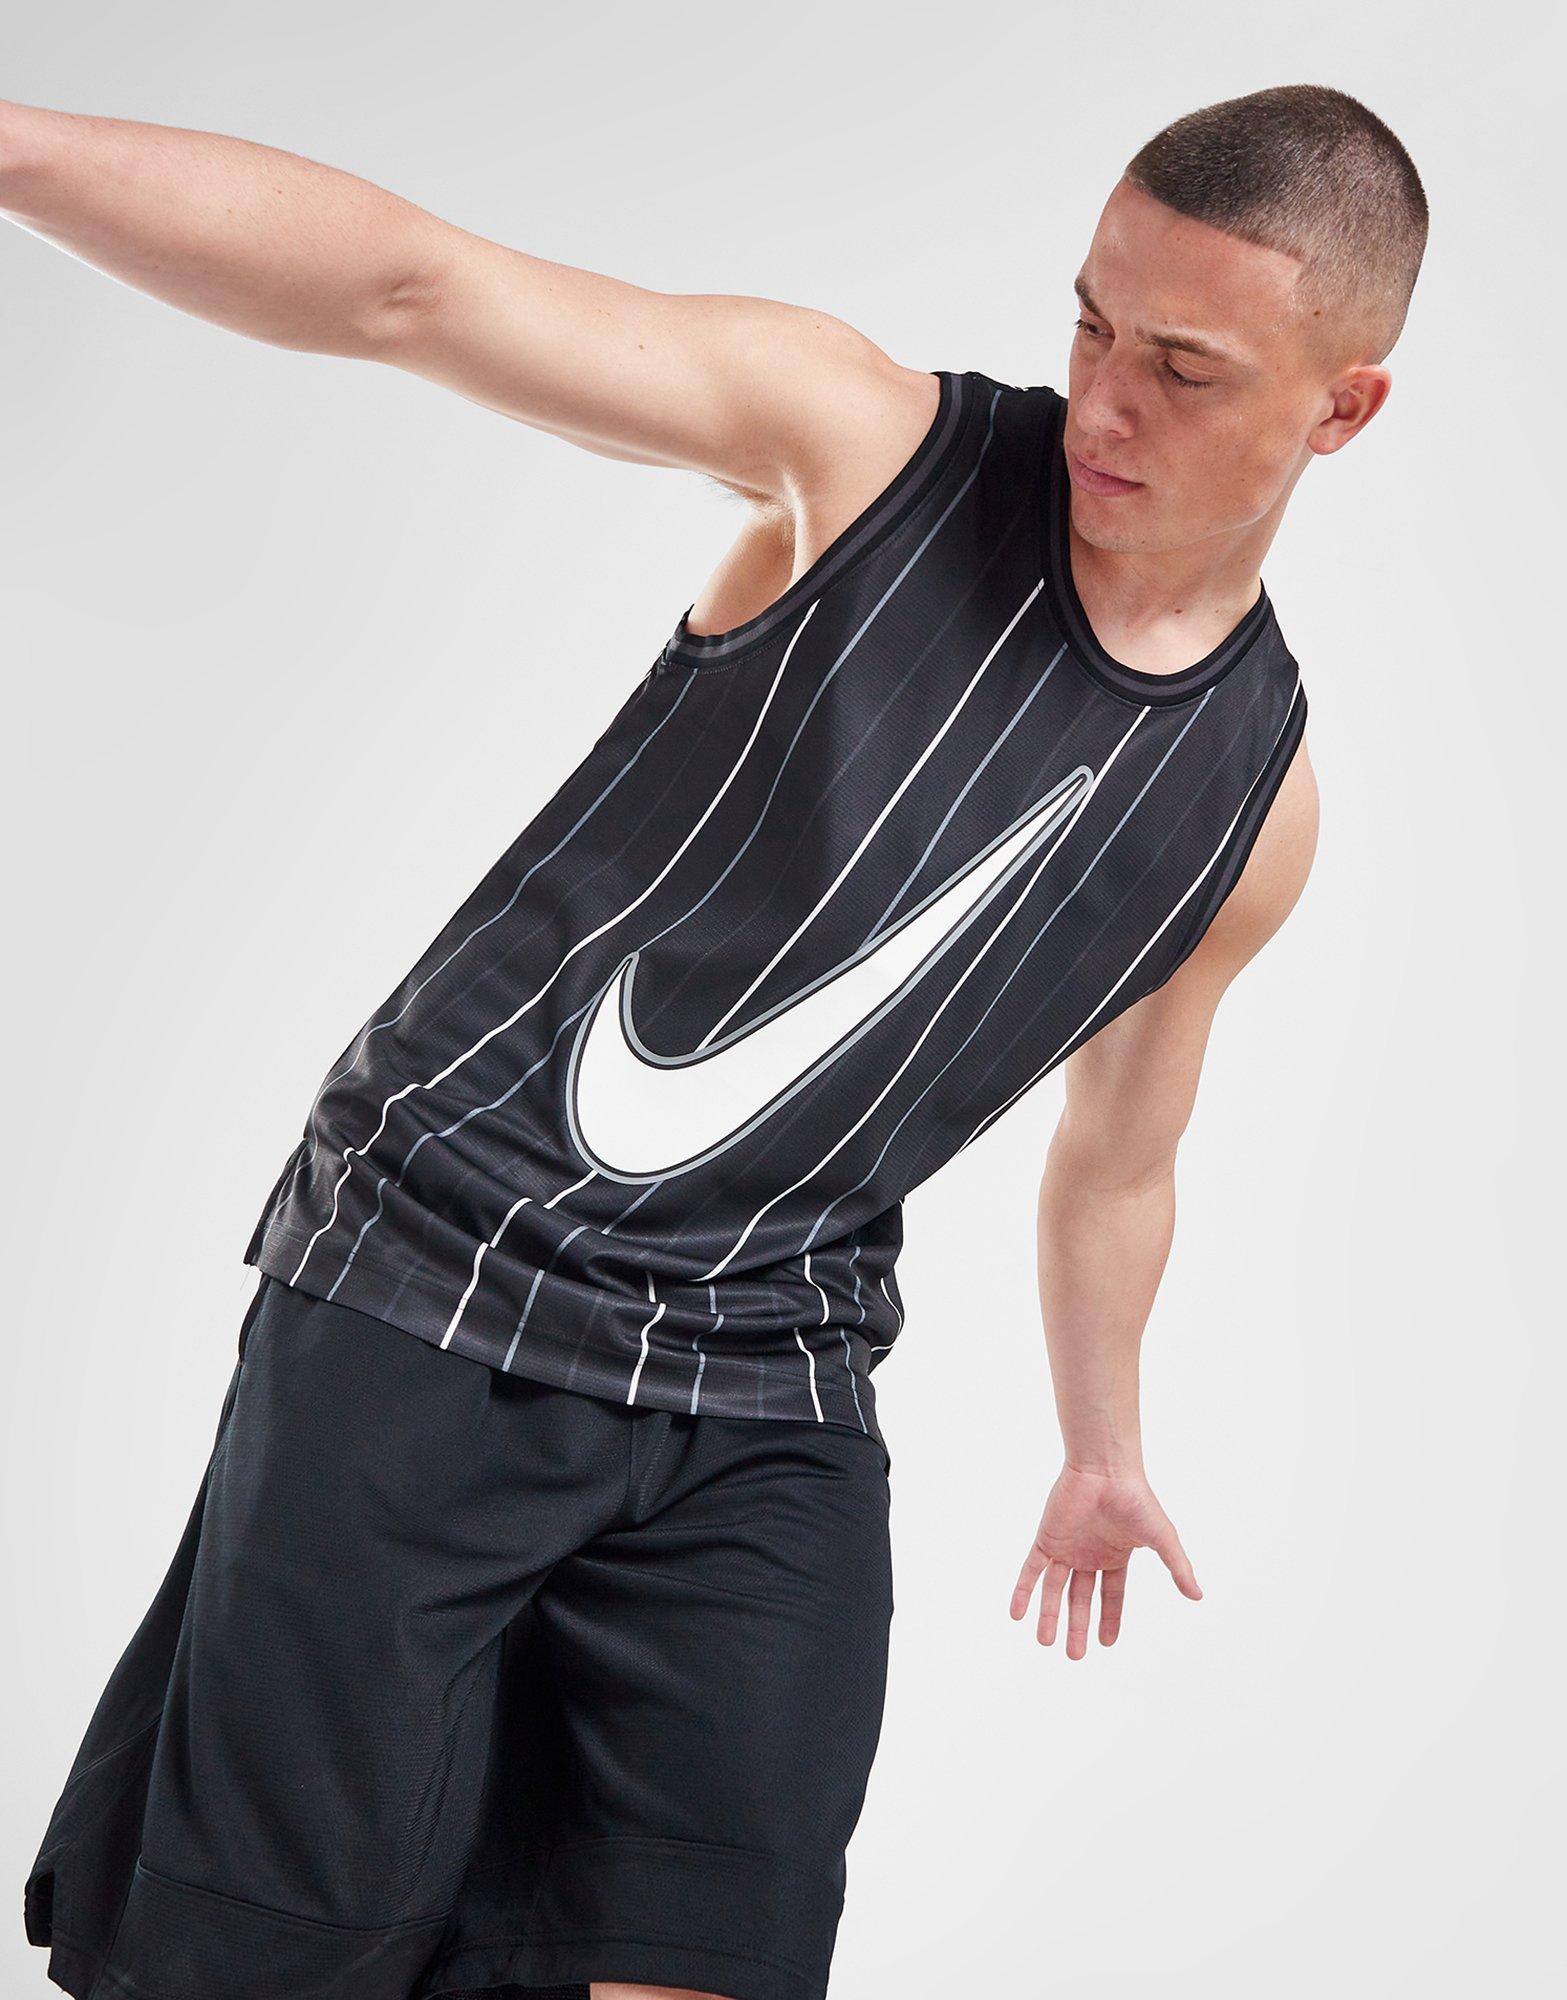 Nike Basketball Dri-Fit Striped Tank Top in Black and White